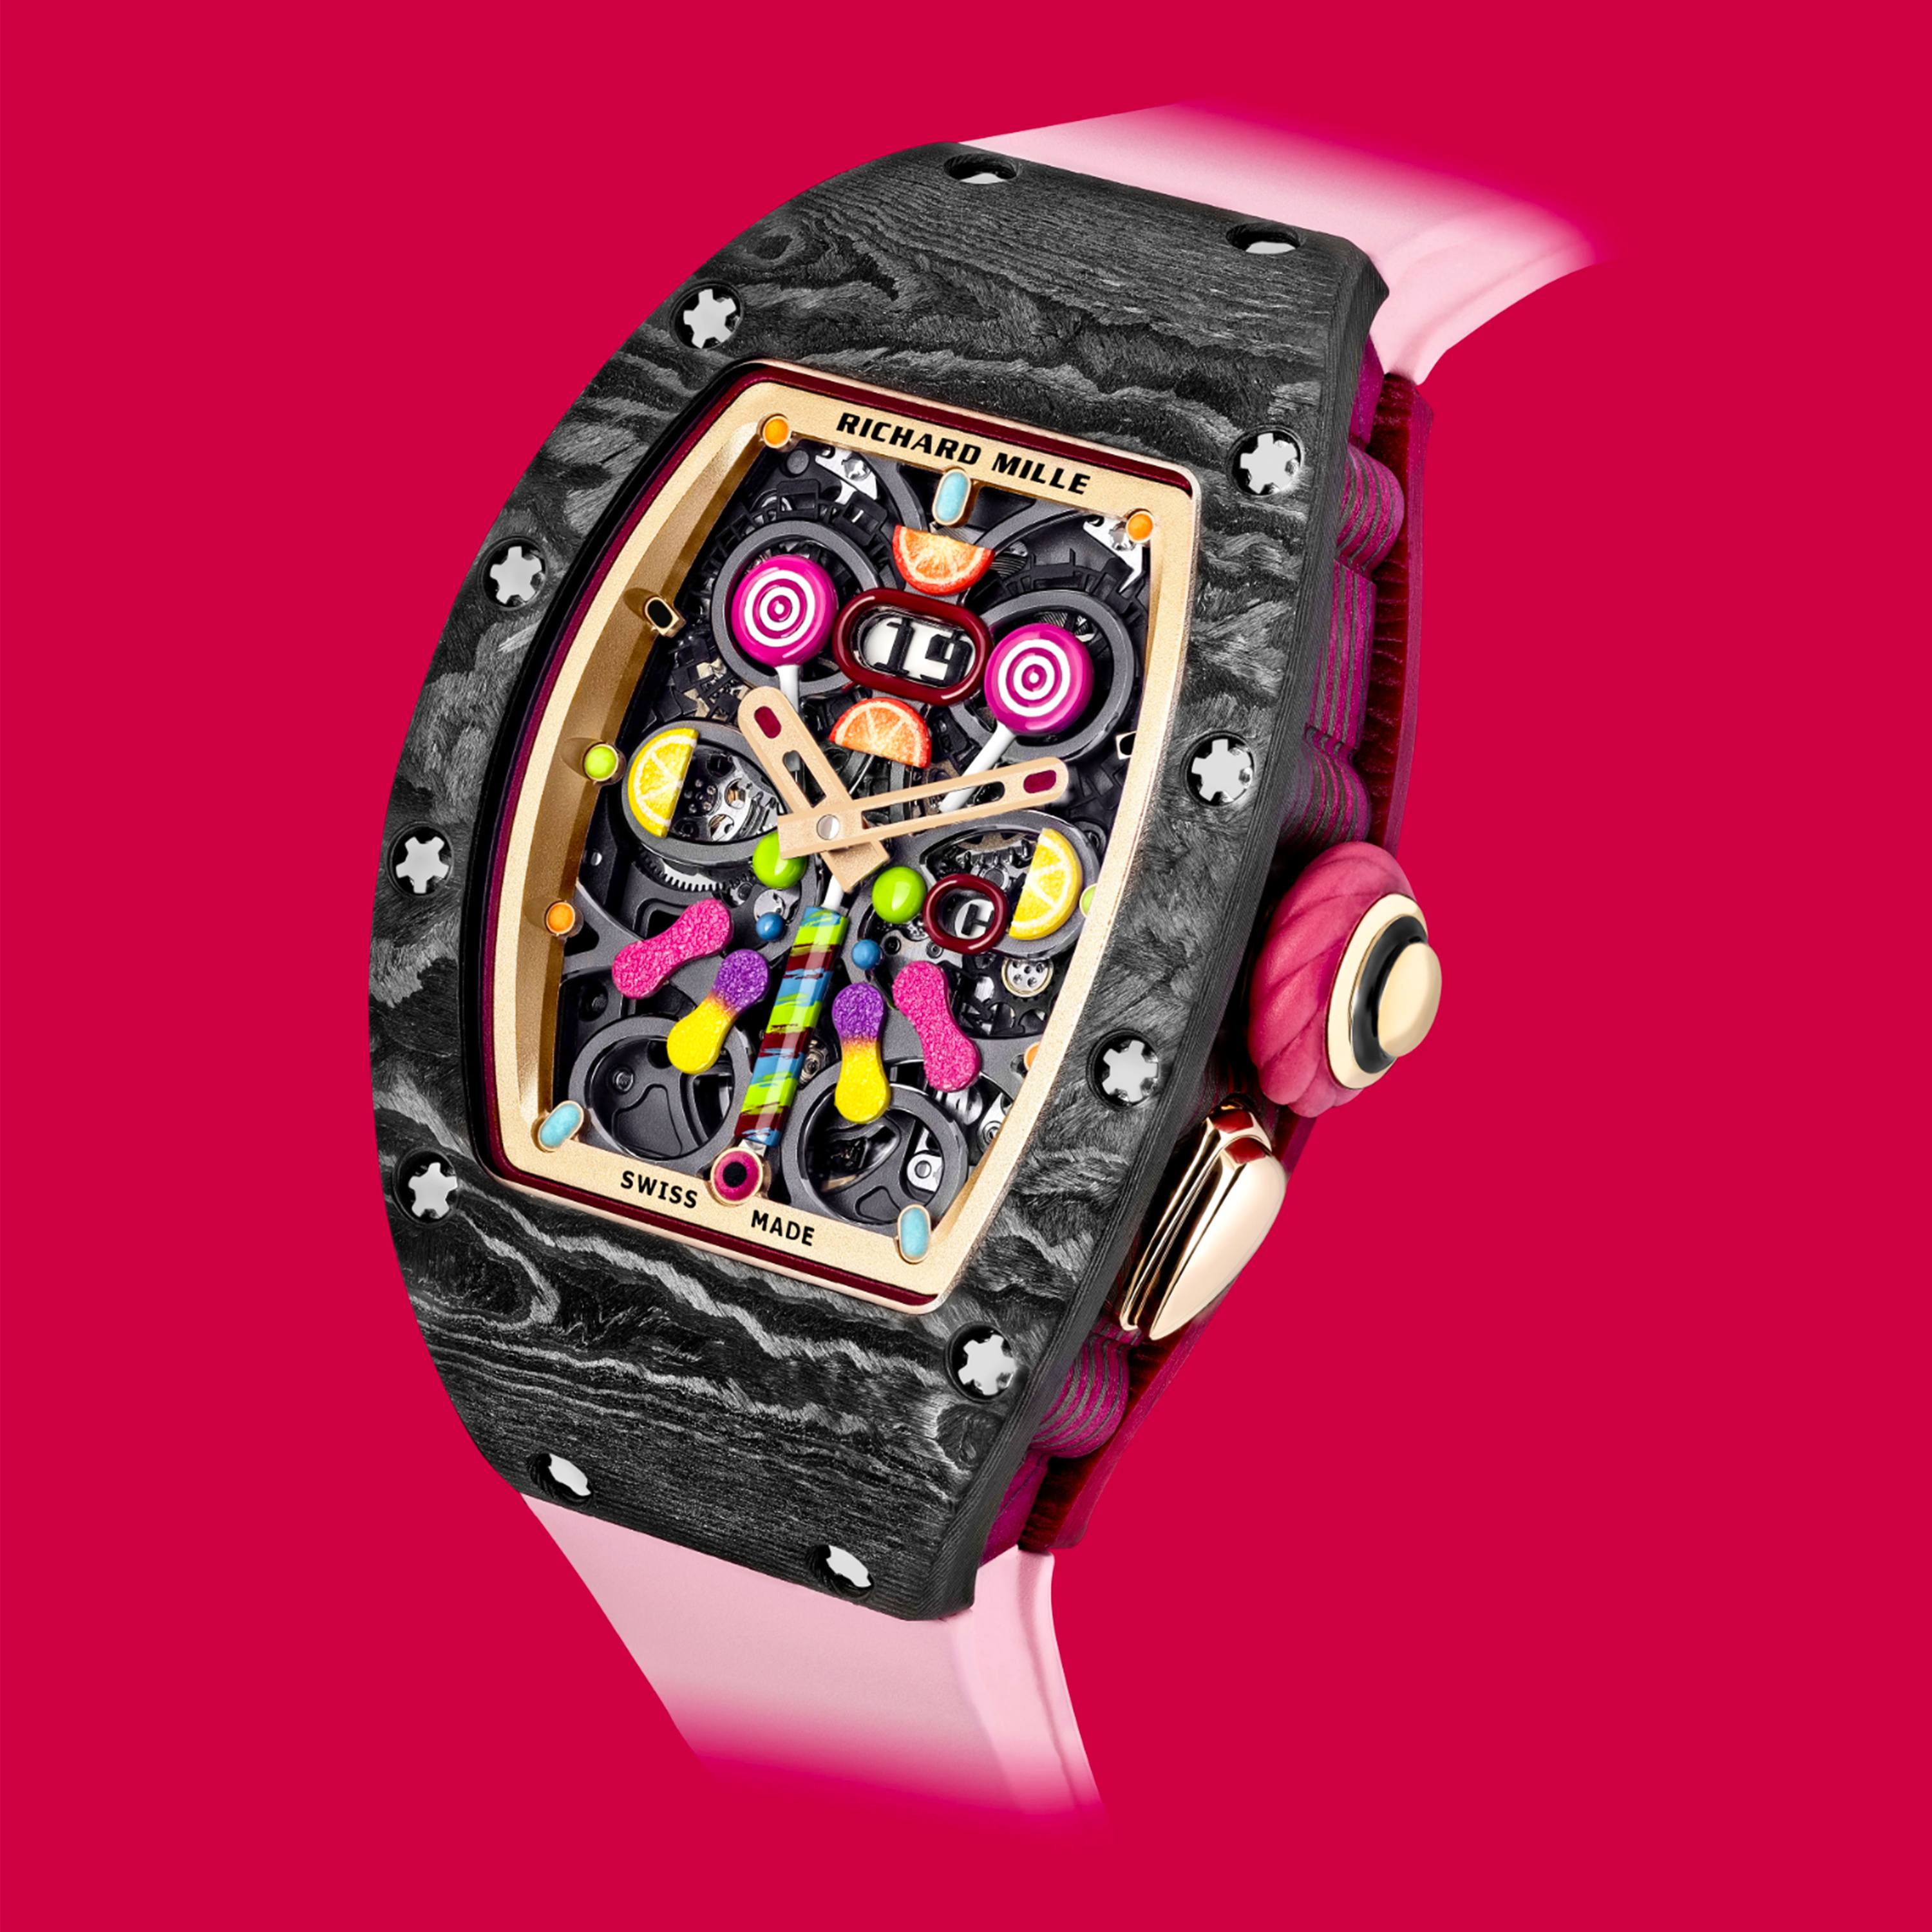 Richard Mille Bonbon Collection featuring the multi-colored RM 37-01 Automatic Cerise timepiece